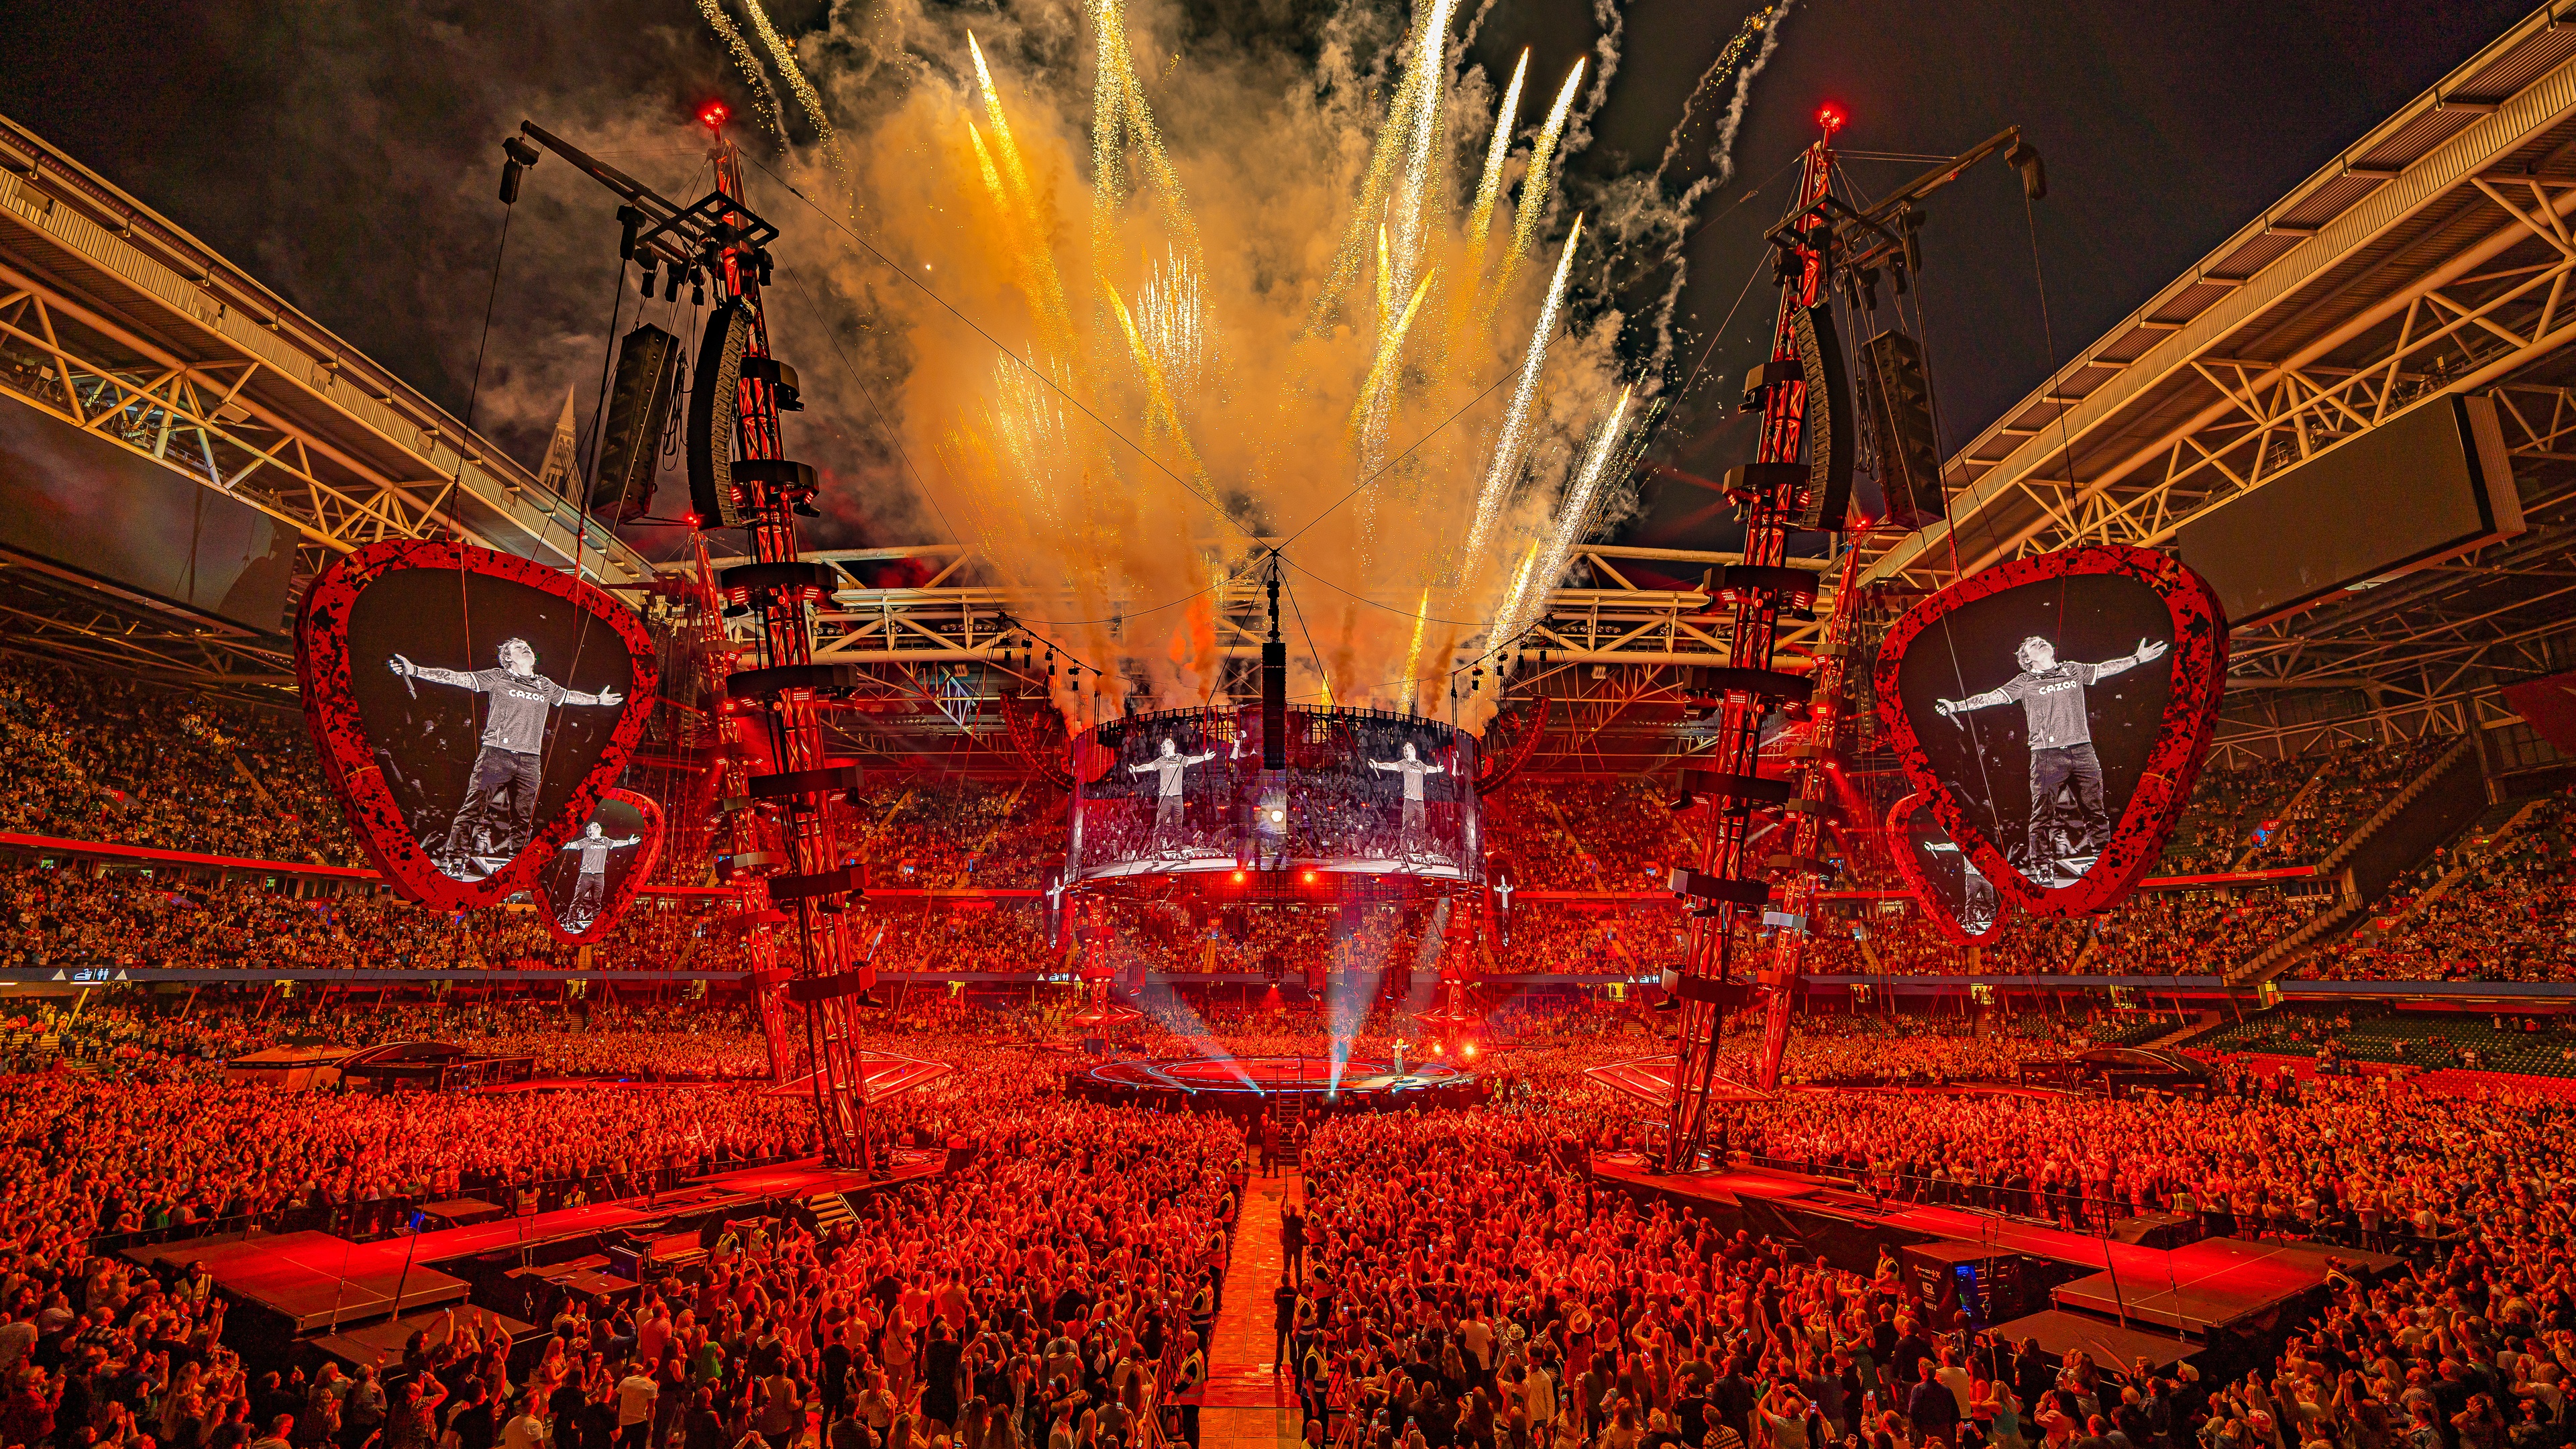 Ed Sheeran Mathematics stage lit up red with pyrotechnics coming out of top with large stadium crowd